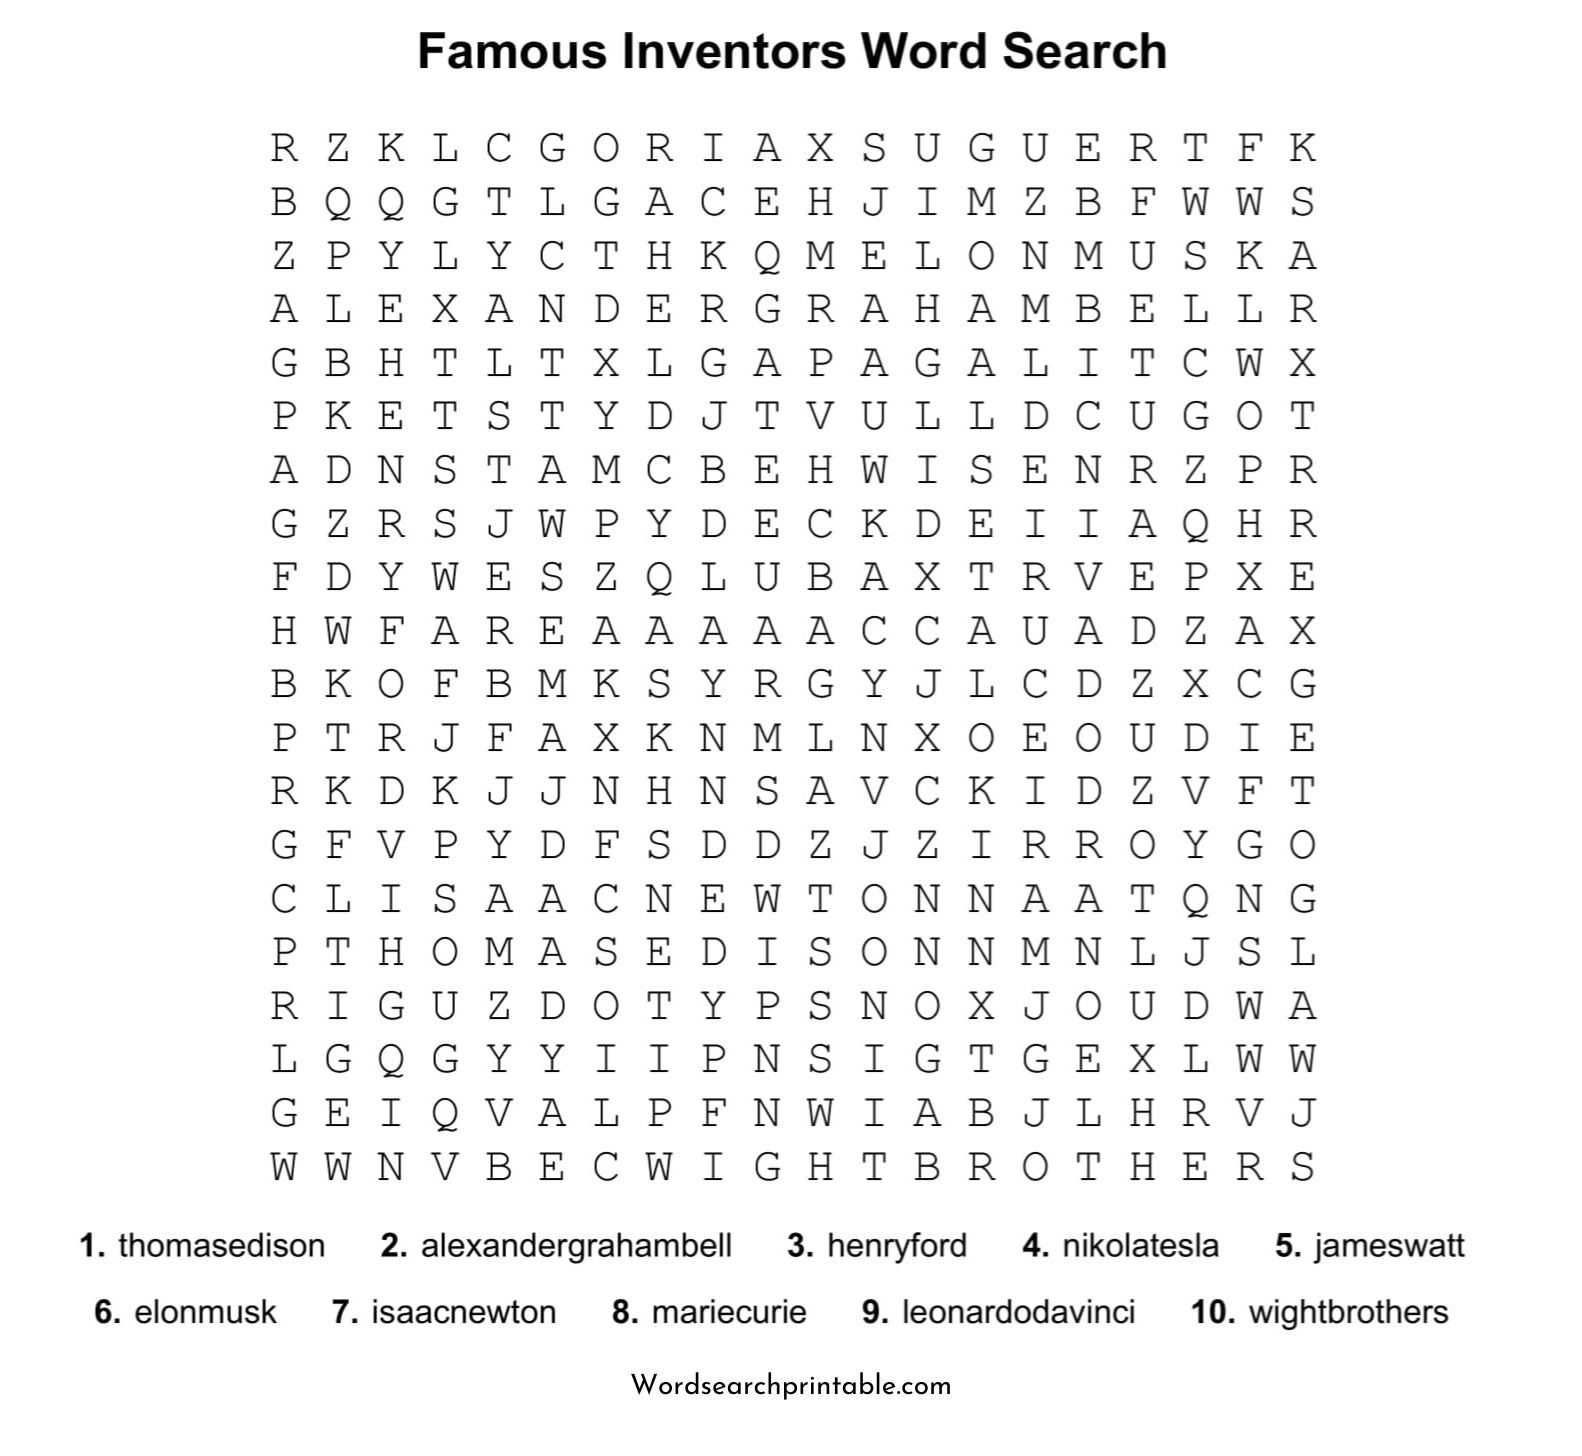 famous inventors word search puzzle